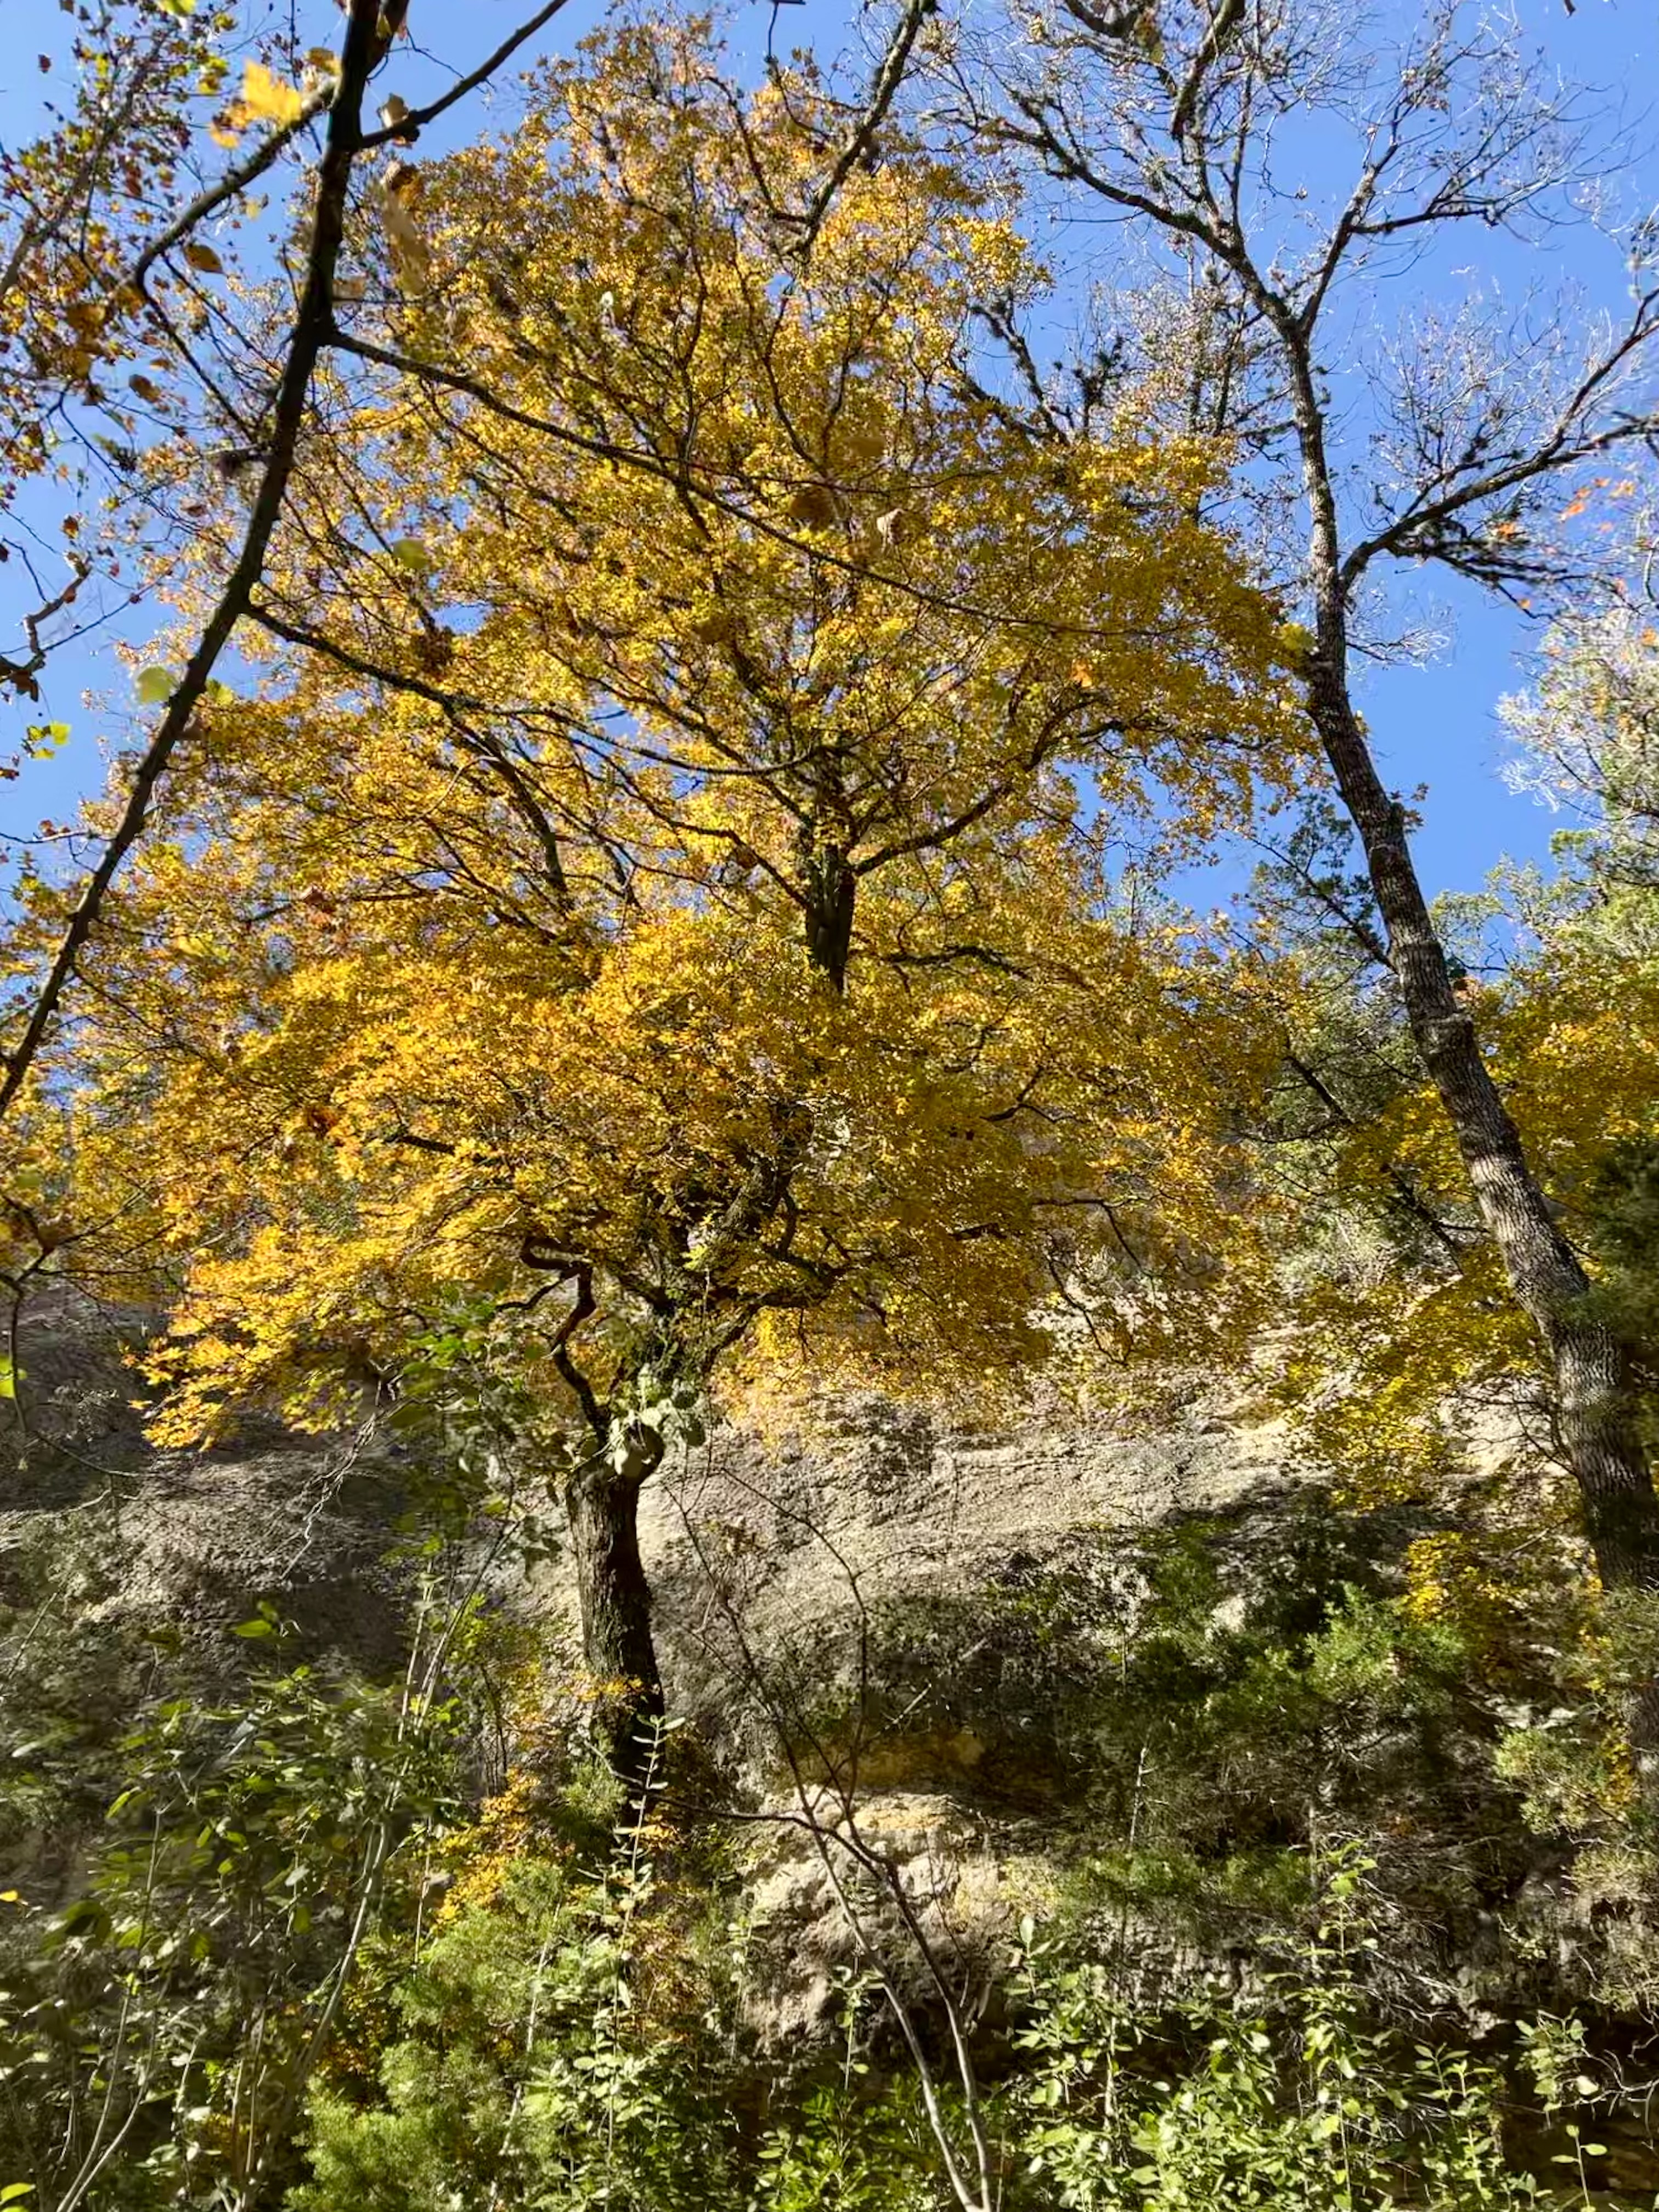 All the tips and reasons you should visit Lost Maples State Natural Area in Texas.